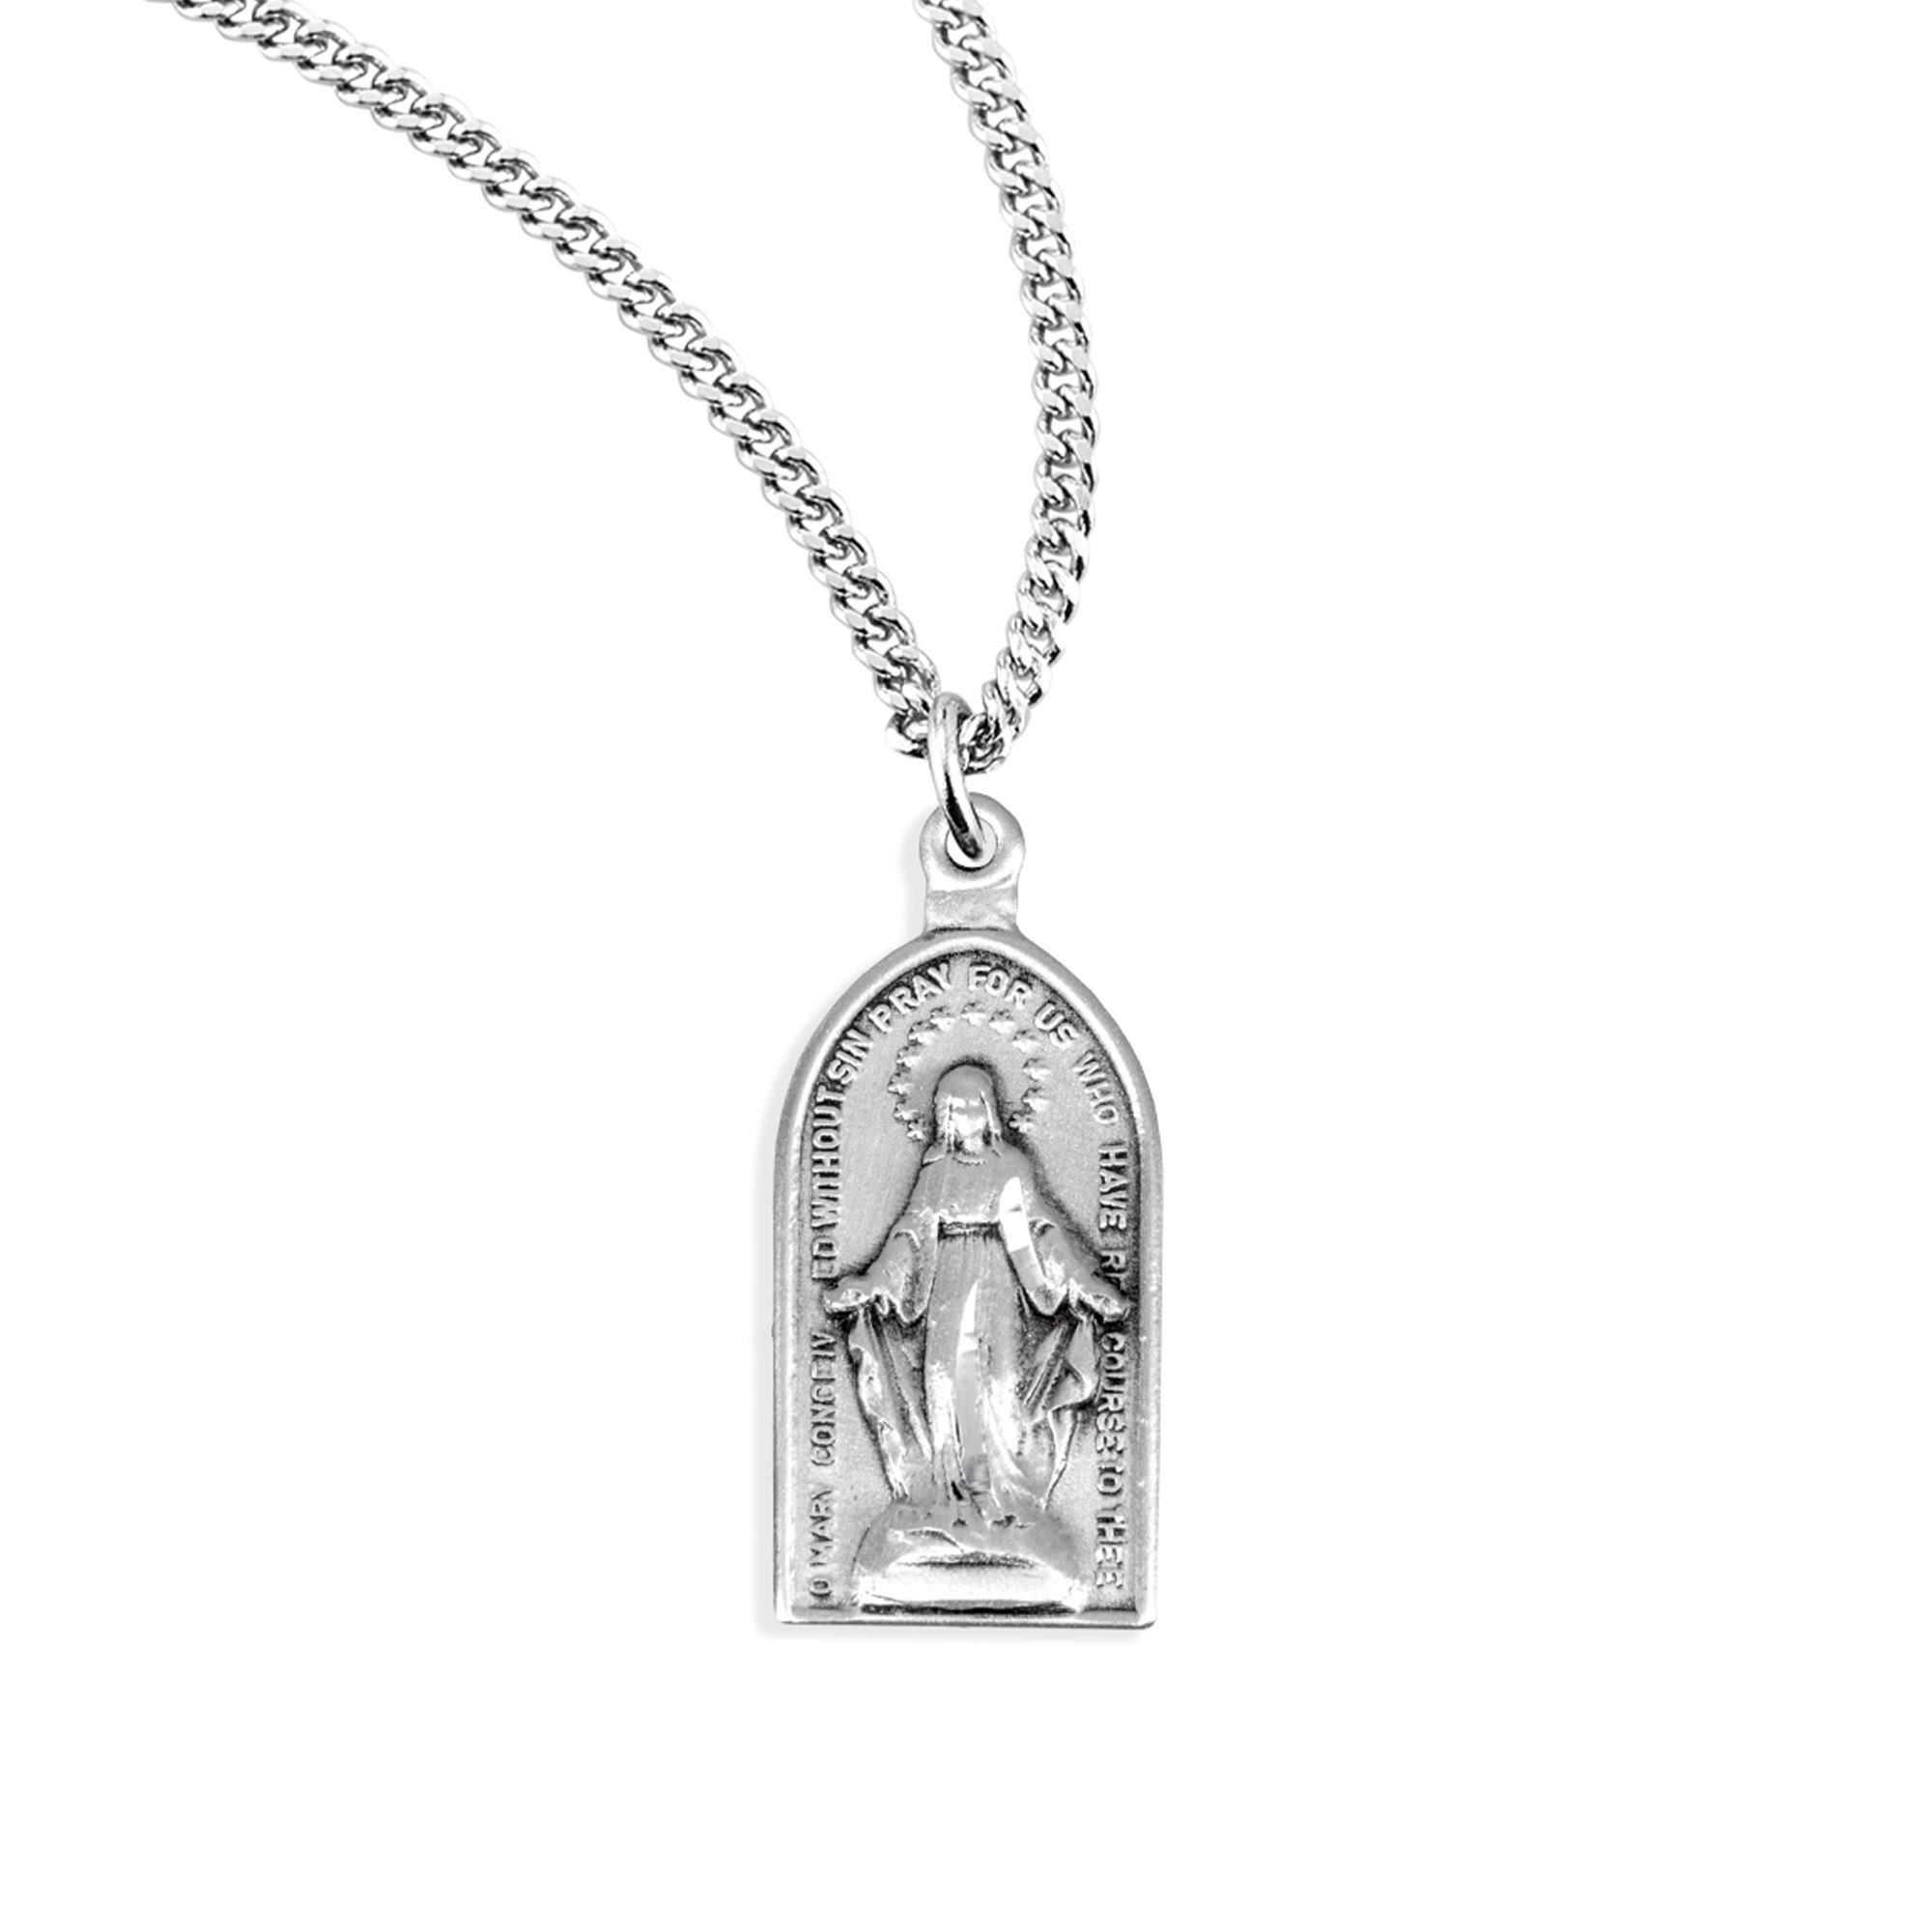 EWTN - Arch Sterling Miraculous Medal with 18" Chain